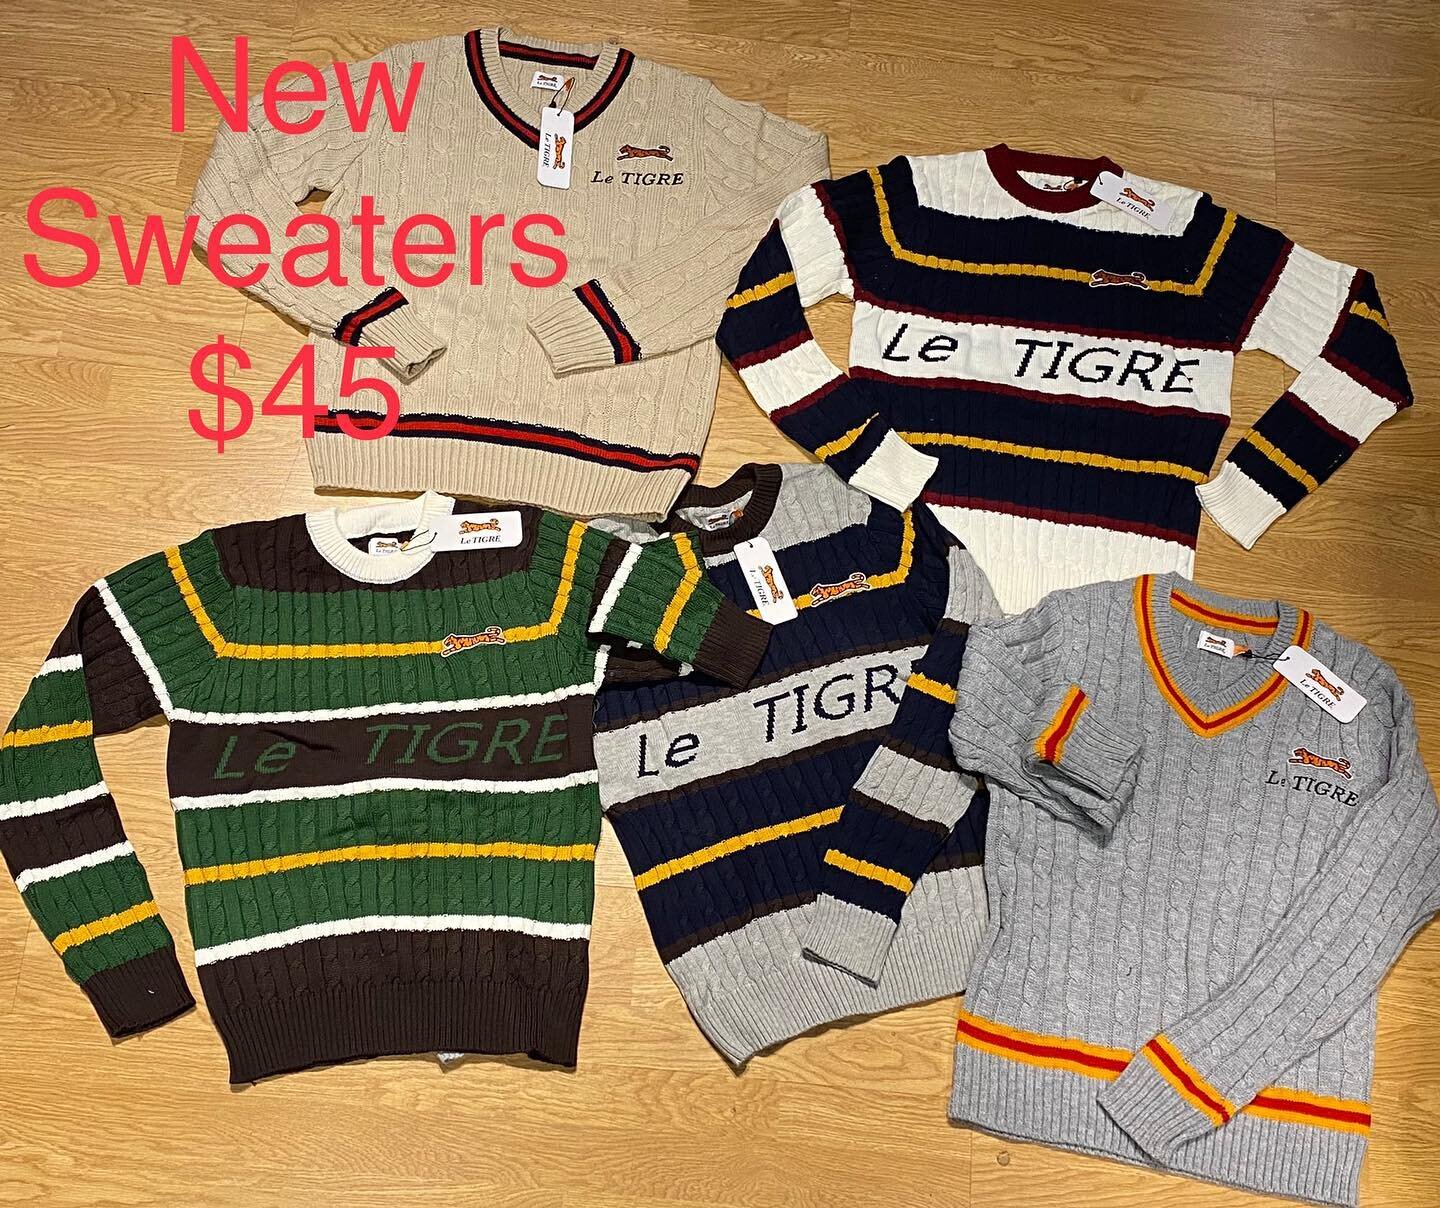 Le Tigre Sweaters are back in! 18 new styles! All sizes! #203 #streetwear #sweaters #90s #80s  #bpt